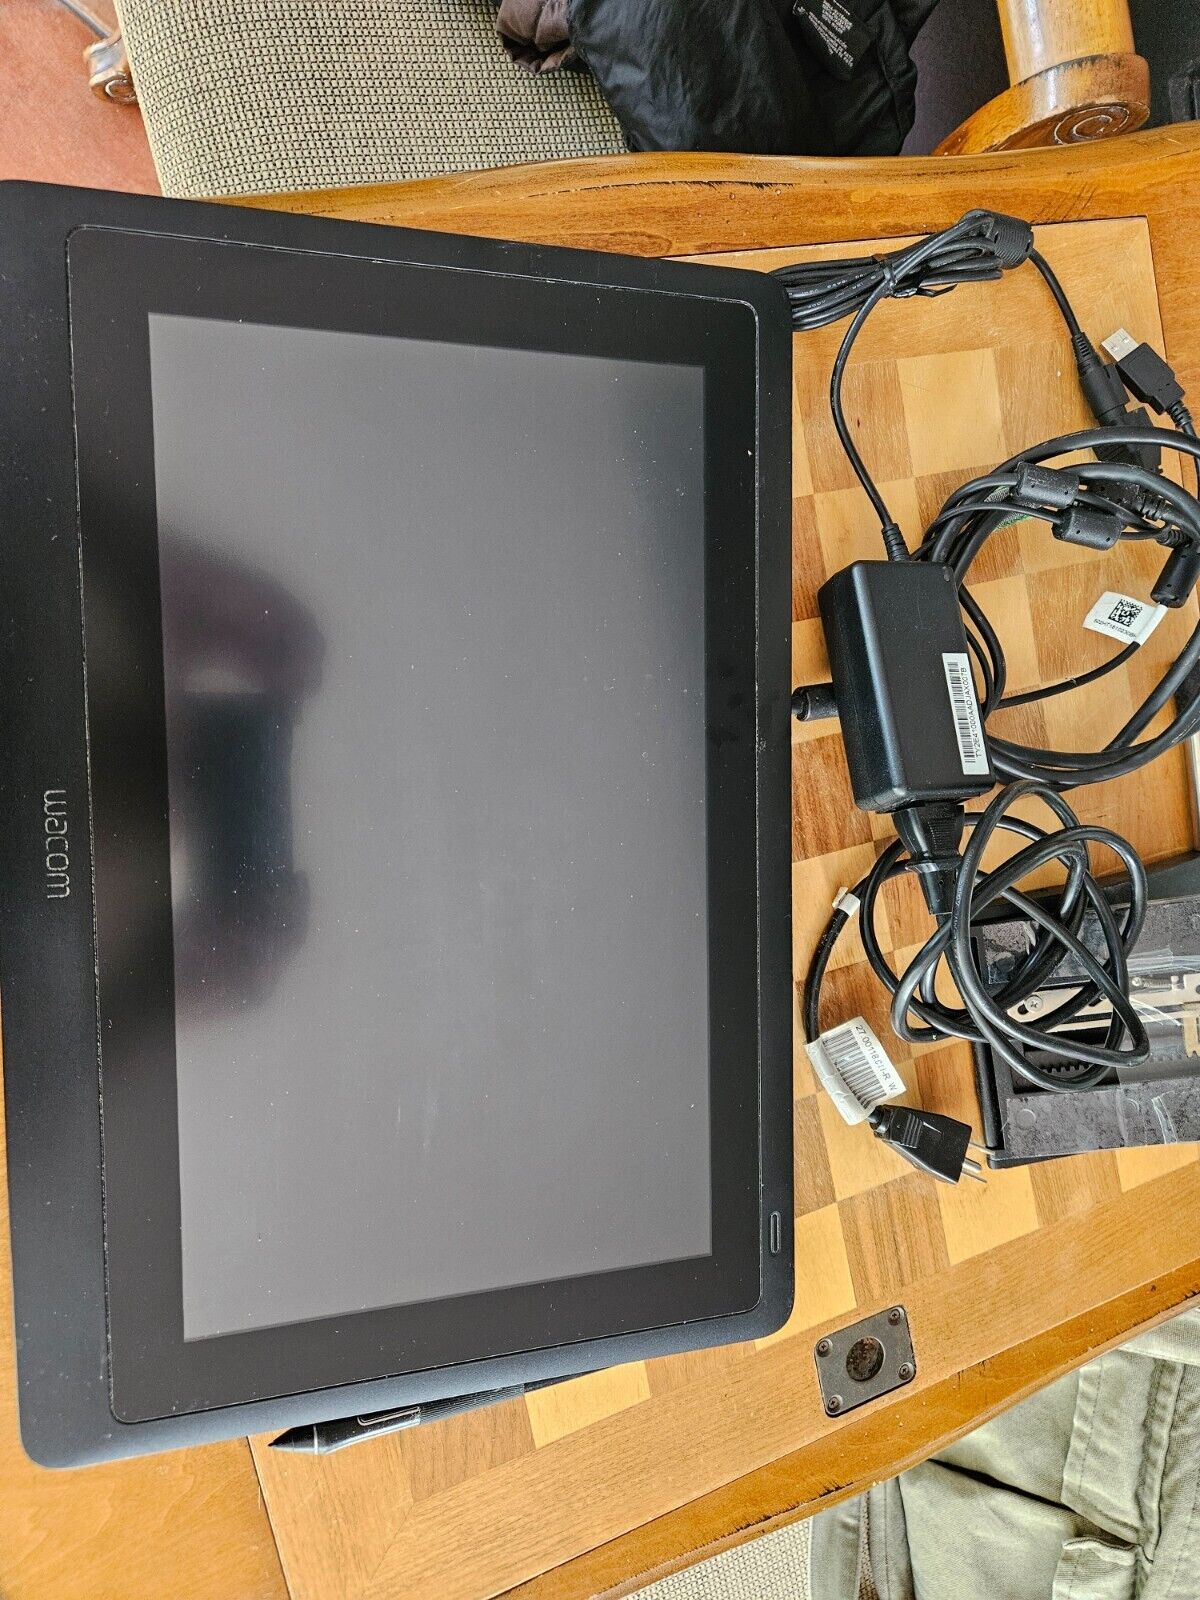 Wacom  Cintiq 16 inch Graphic Drawing Monitor With Pen and  Stand